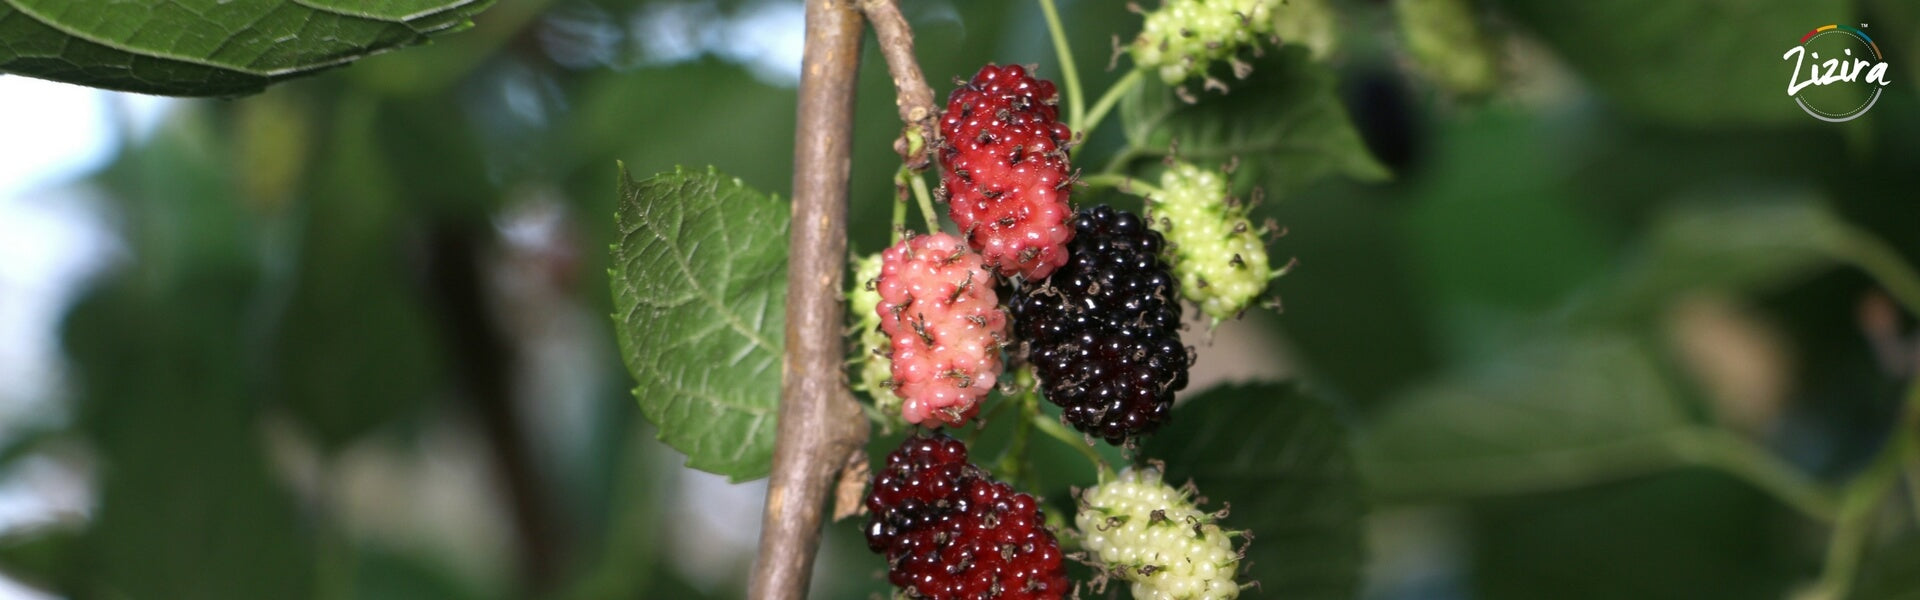 About Mulberry, Mulberry Story, Mulberry World, Mulberry